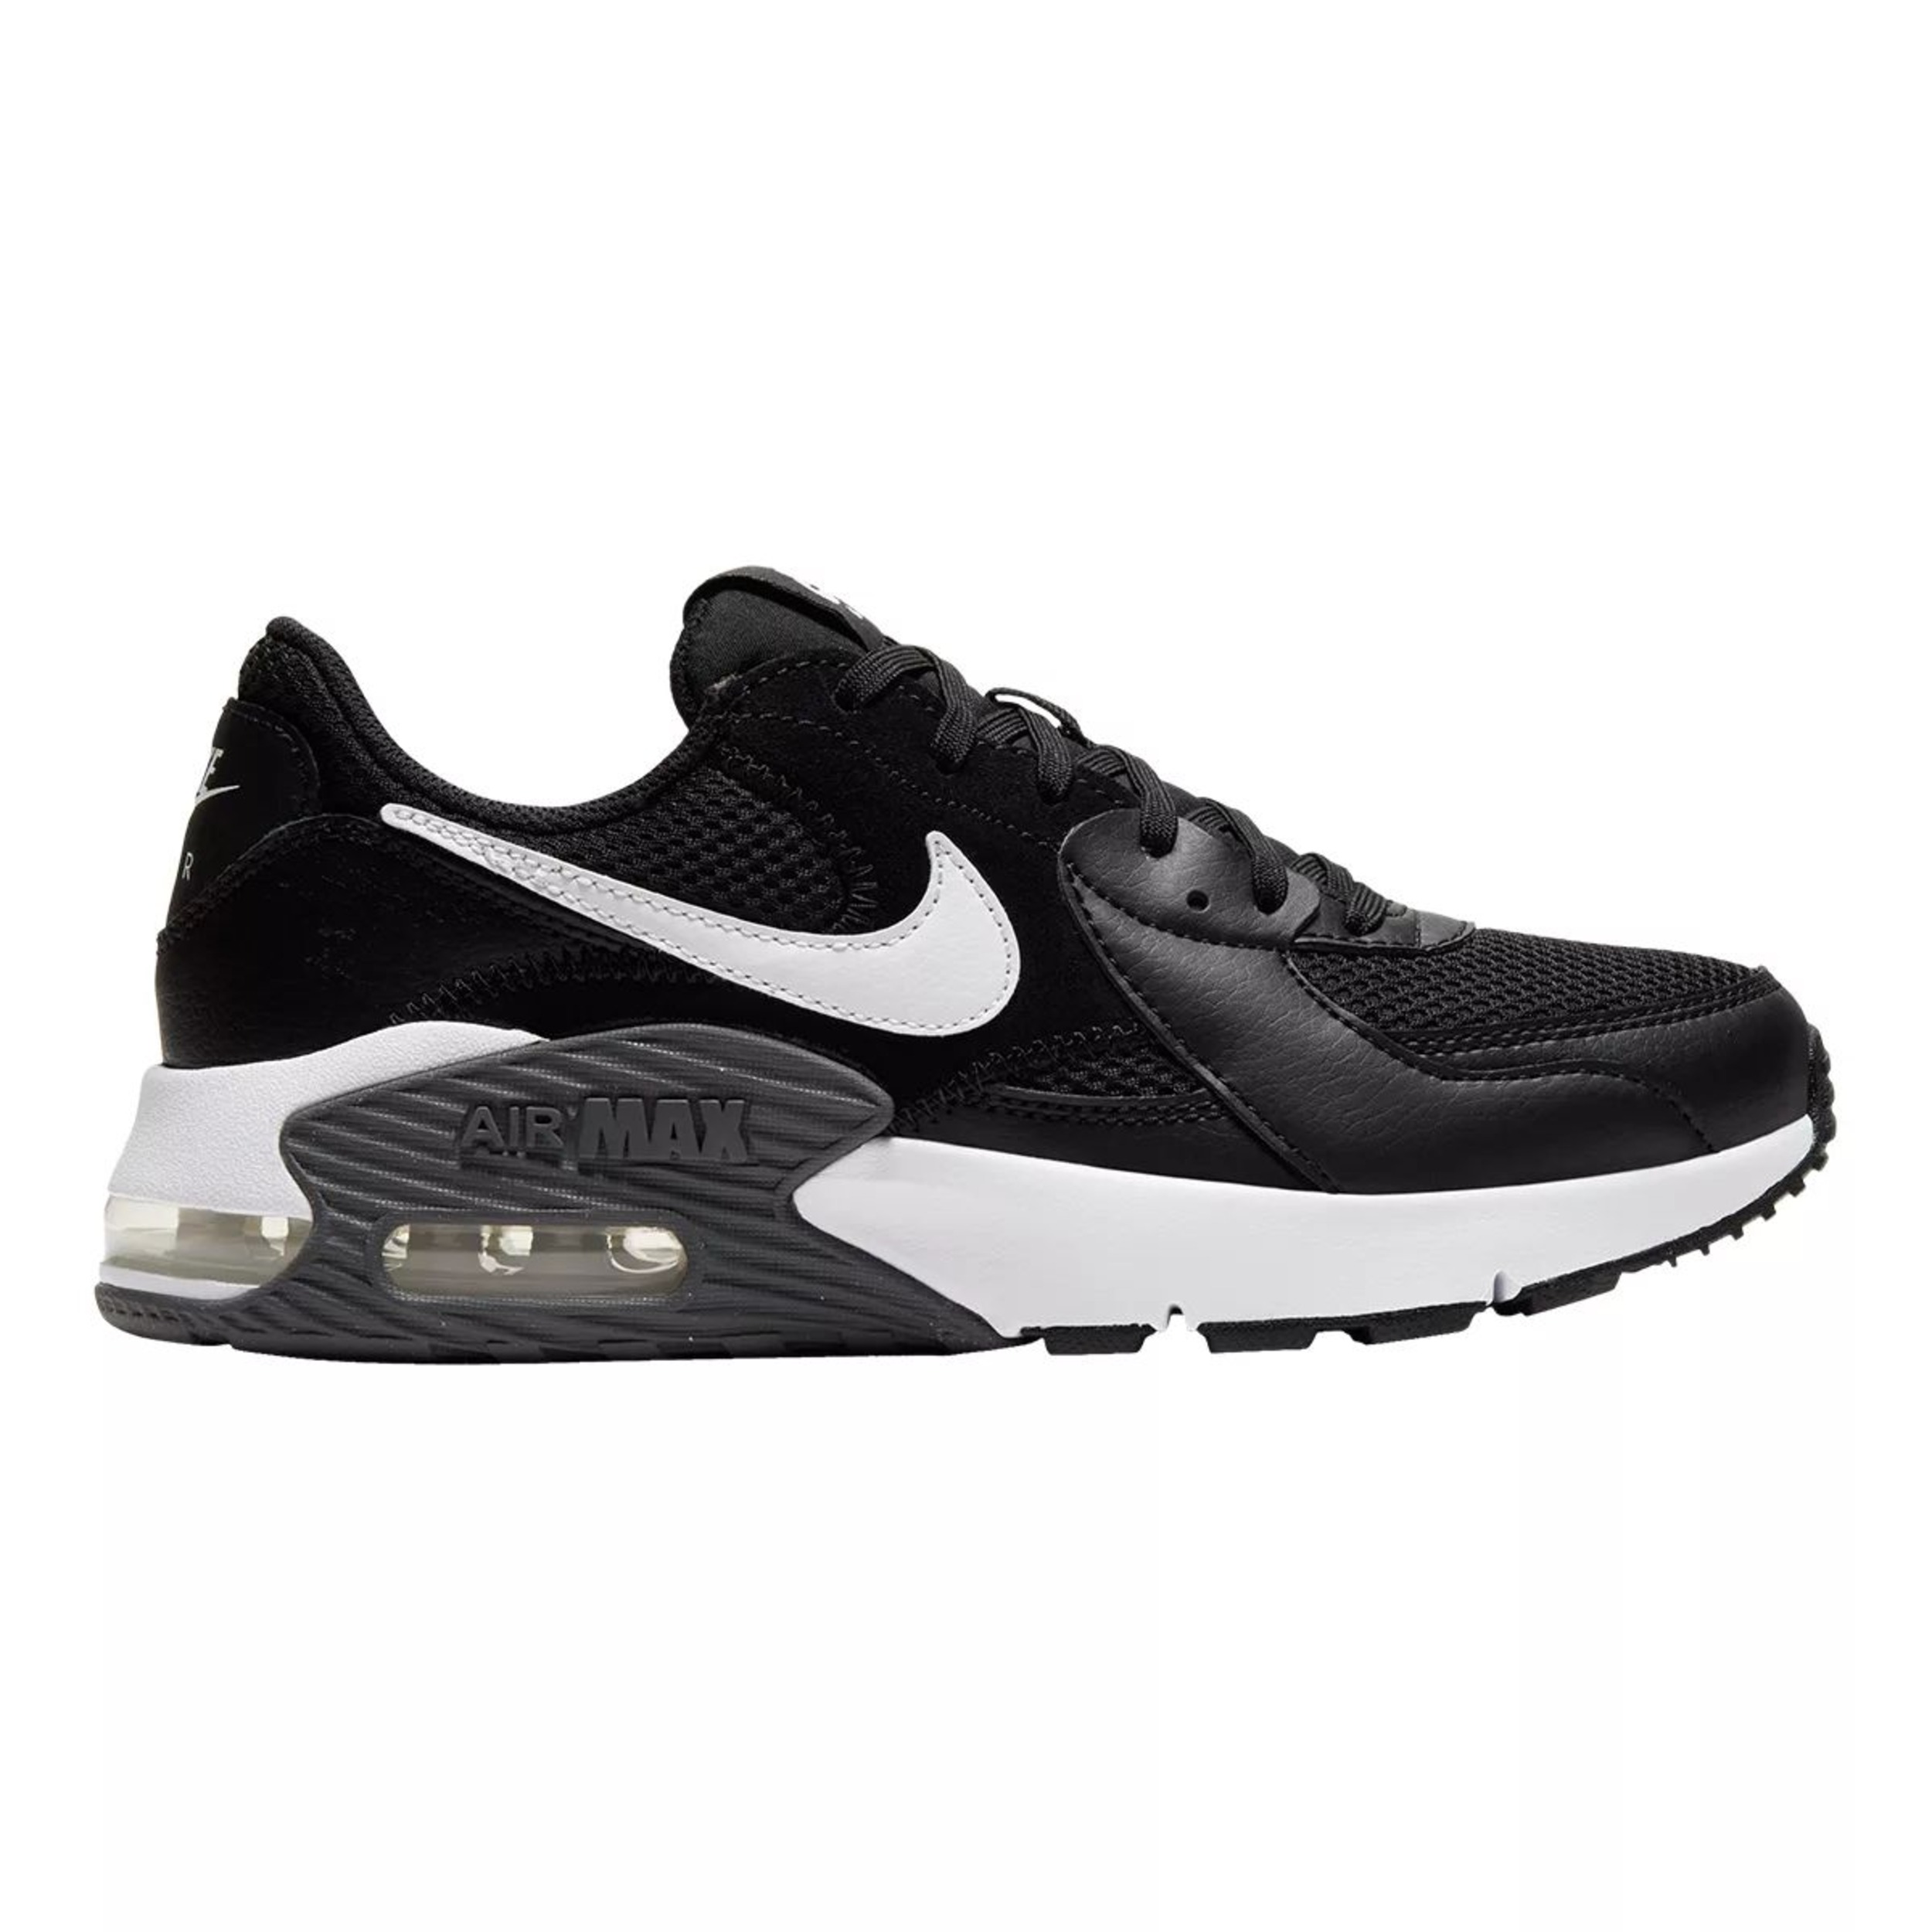 Nike Women's Air Max Excee Shoes, Sneakers, Cushioned, Lightweight ...